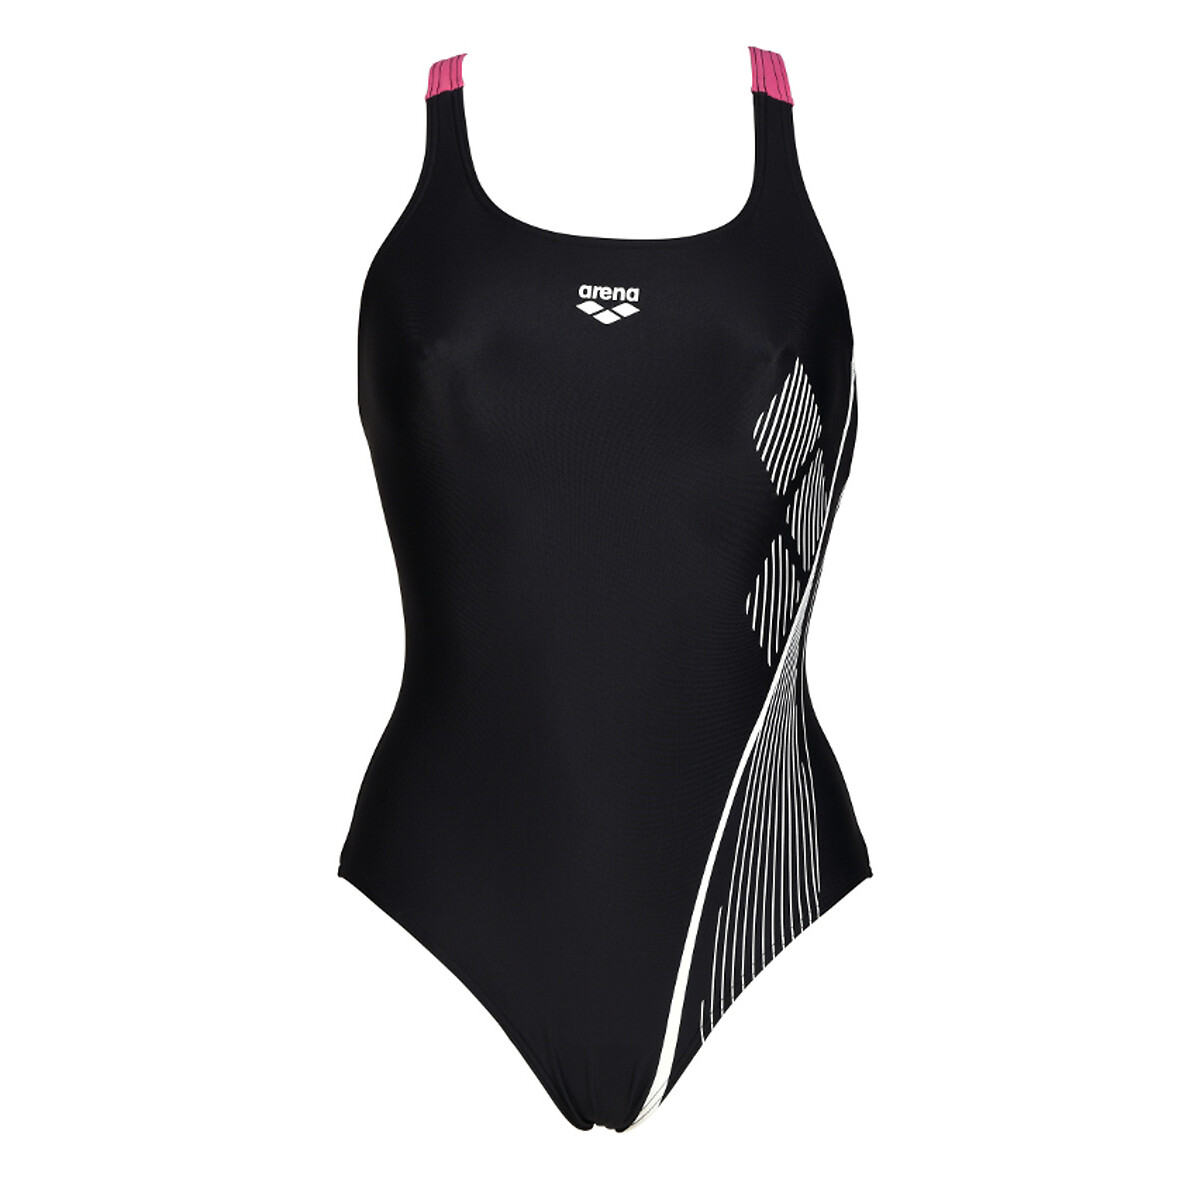 Image of Graphic Swim Pro Back Recycled Pool Swimsuit